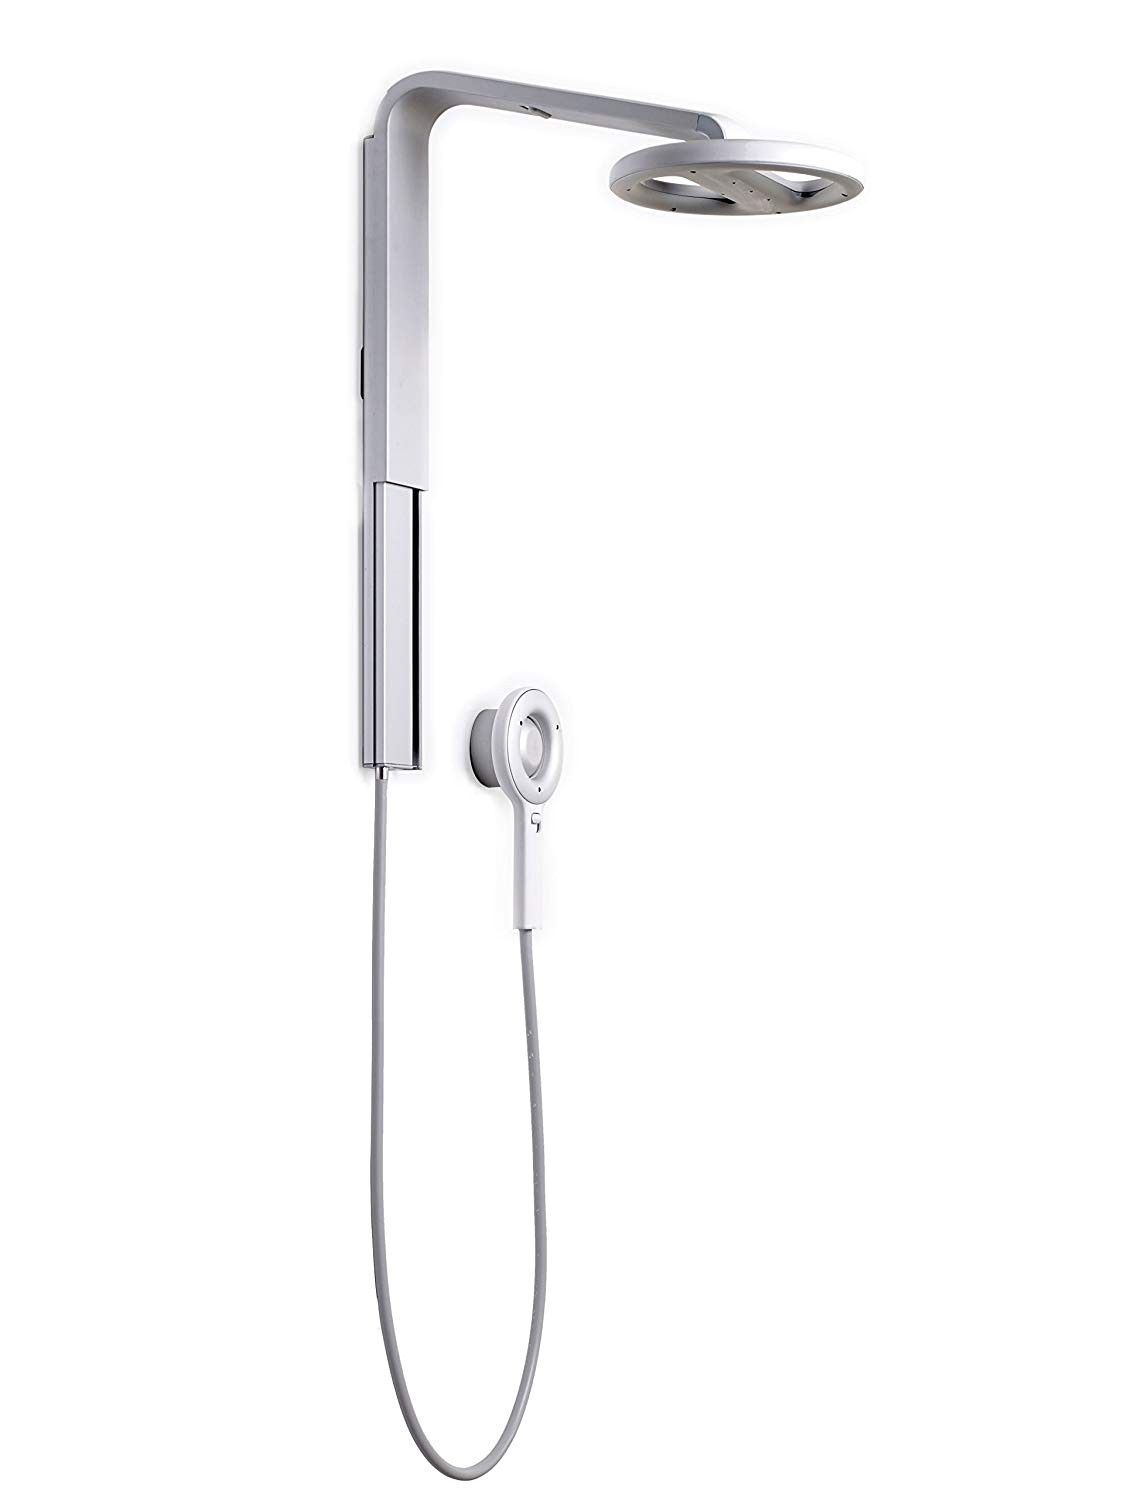 nebia spa shower luxury water innovation sustainable atomizing shower system with 10 head handheld wand adjustable height